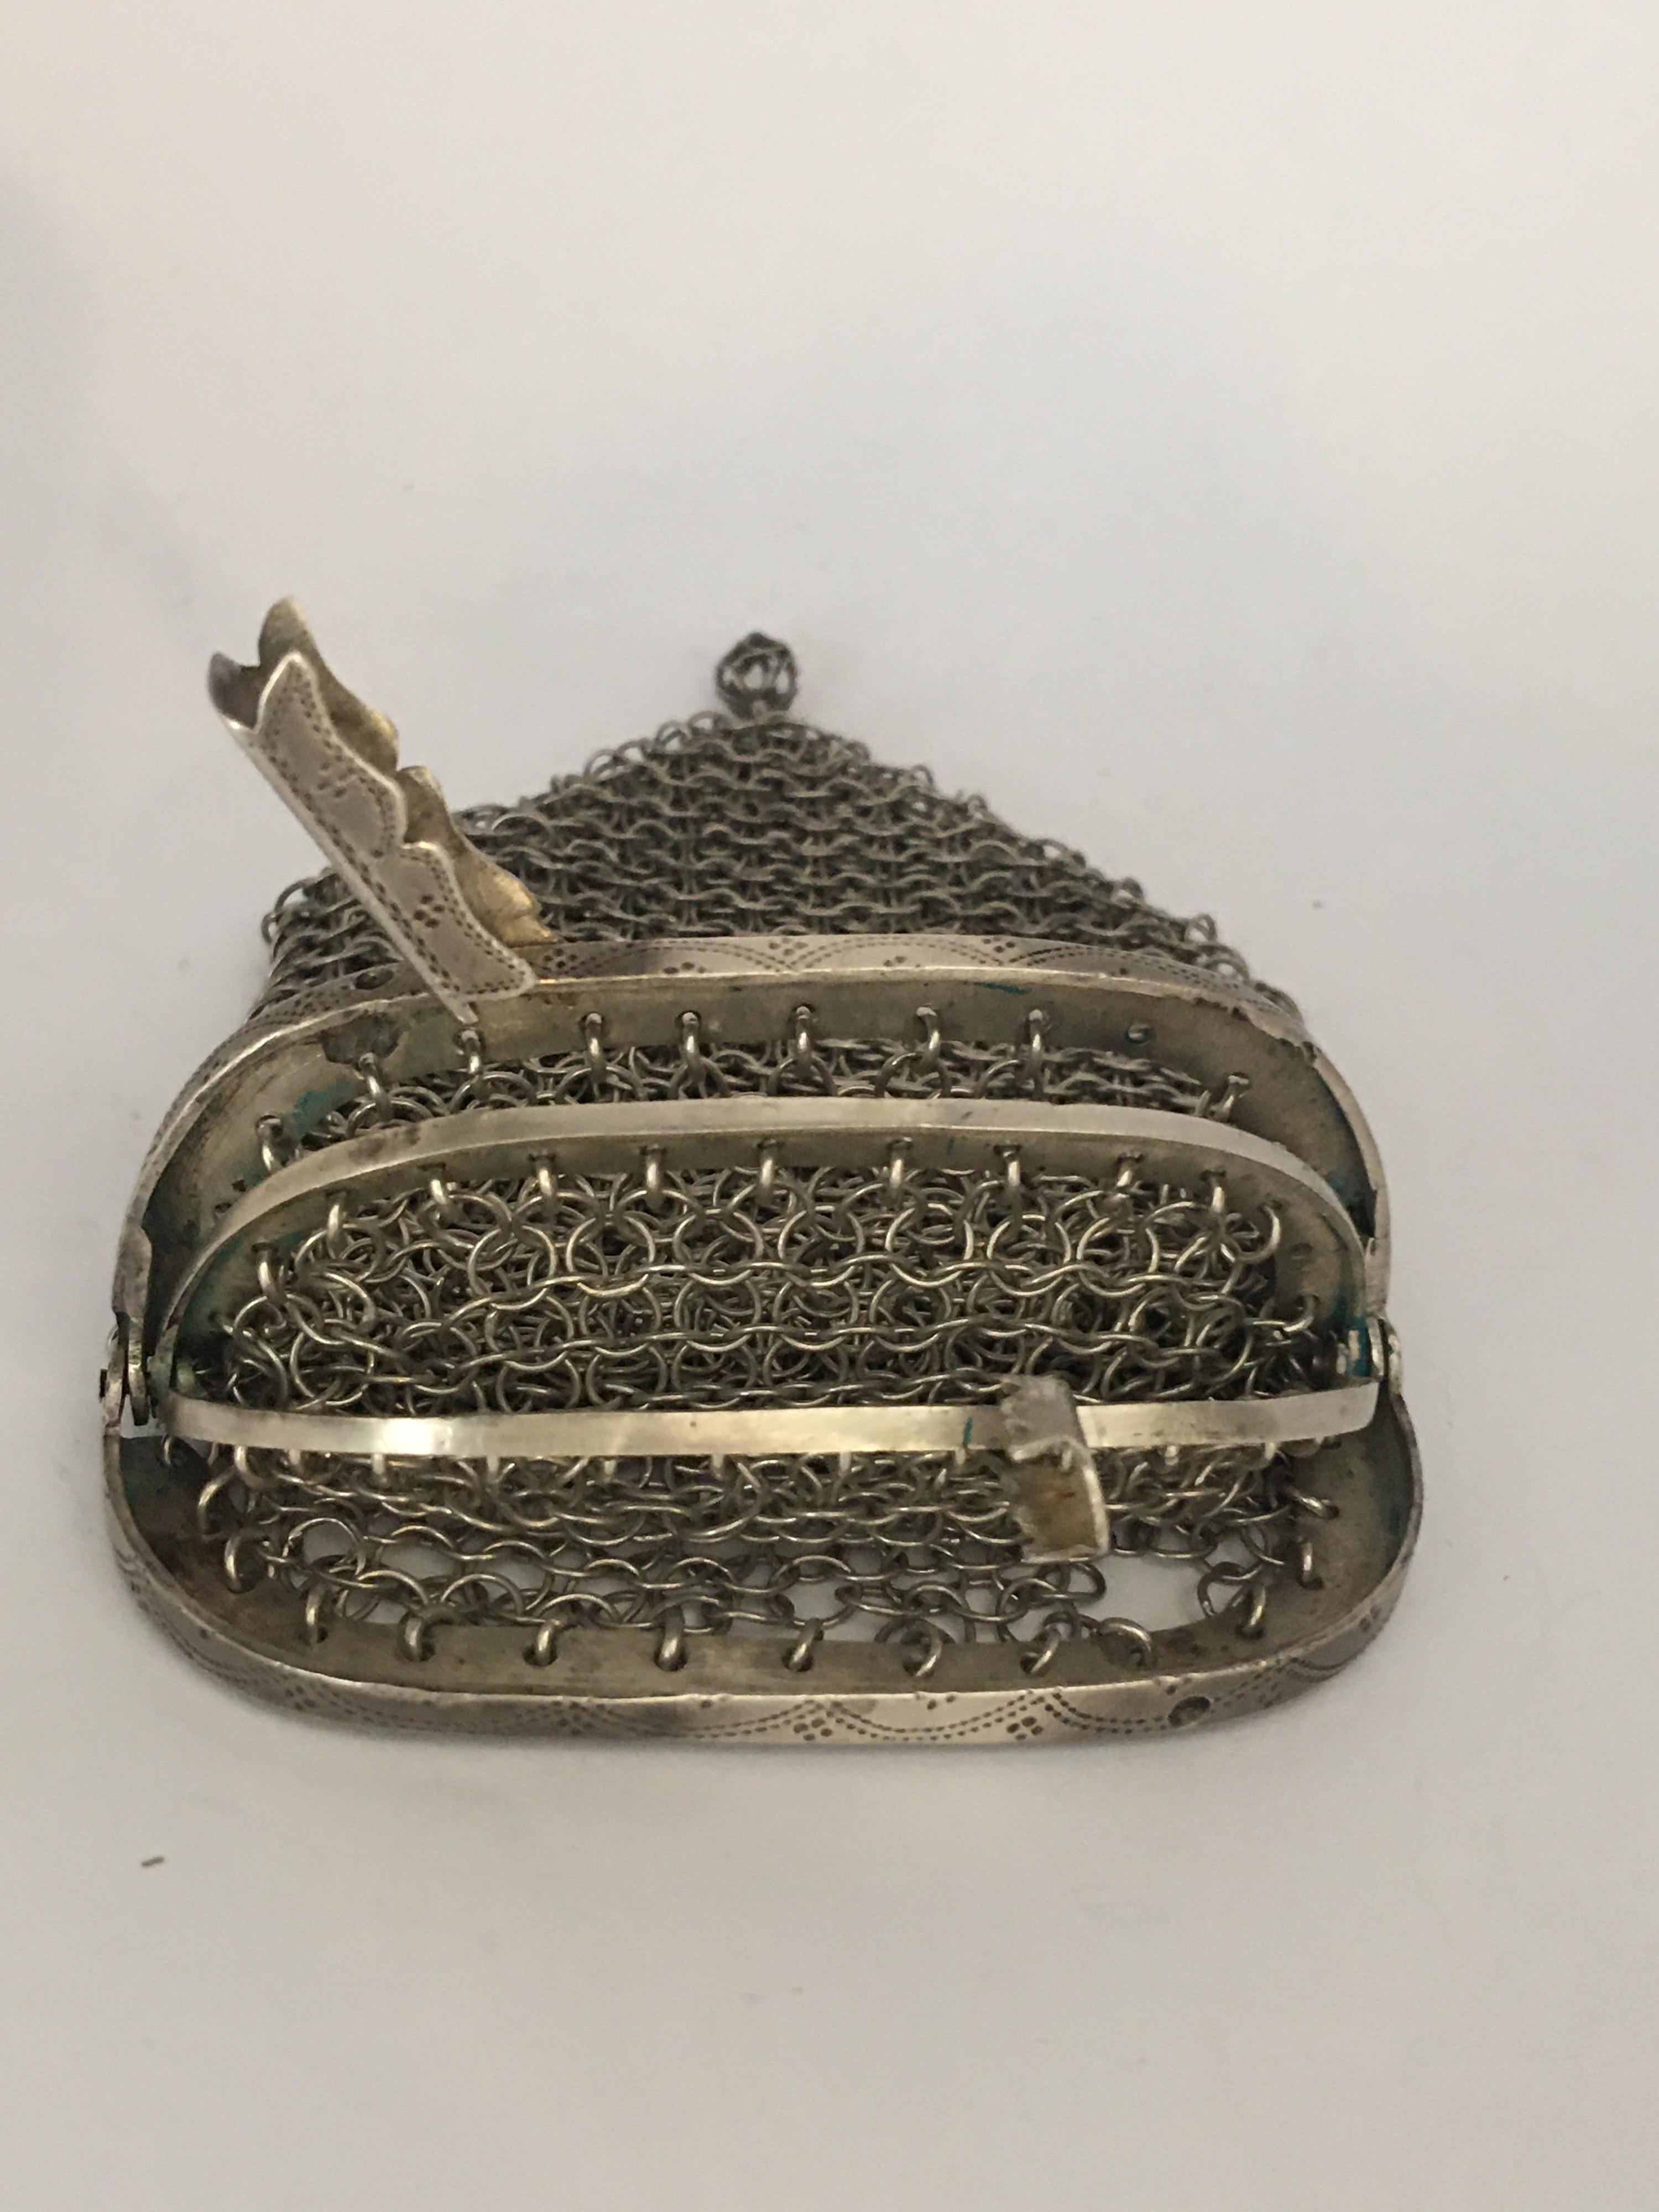 This beautiful antique silver wire pouch is in good condition. It’s measurements are 5 inches long and 2.8 inches wide. Please study the images carefully as form part of the description.